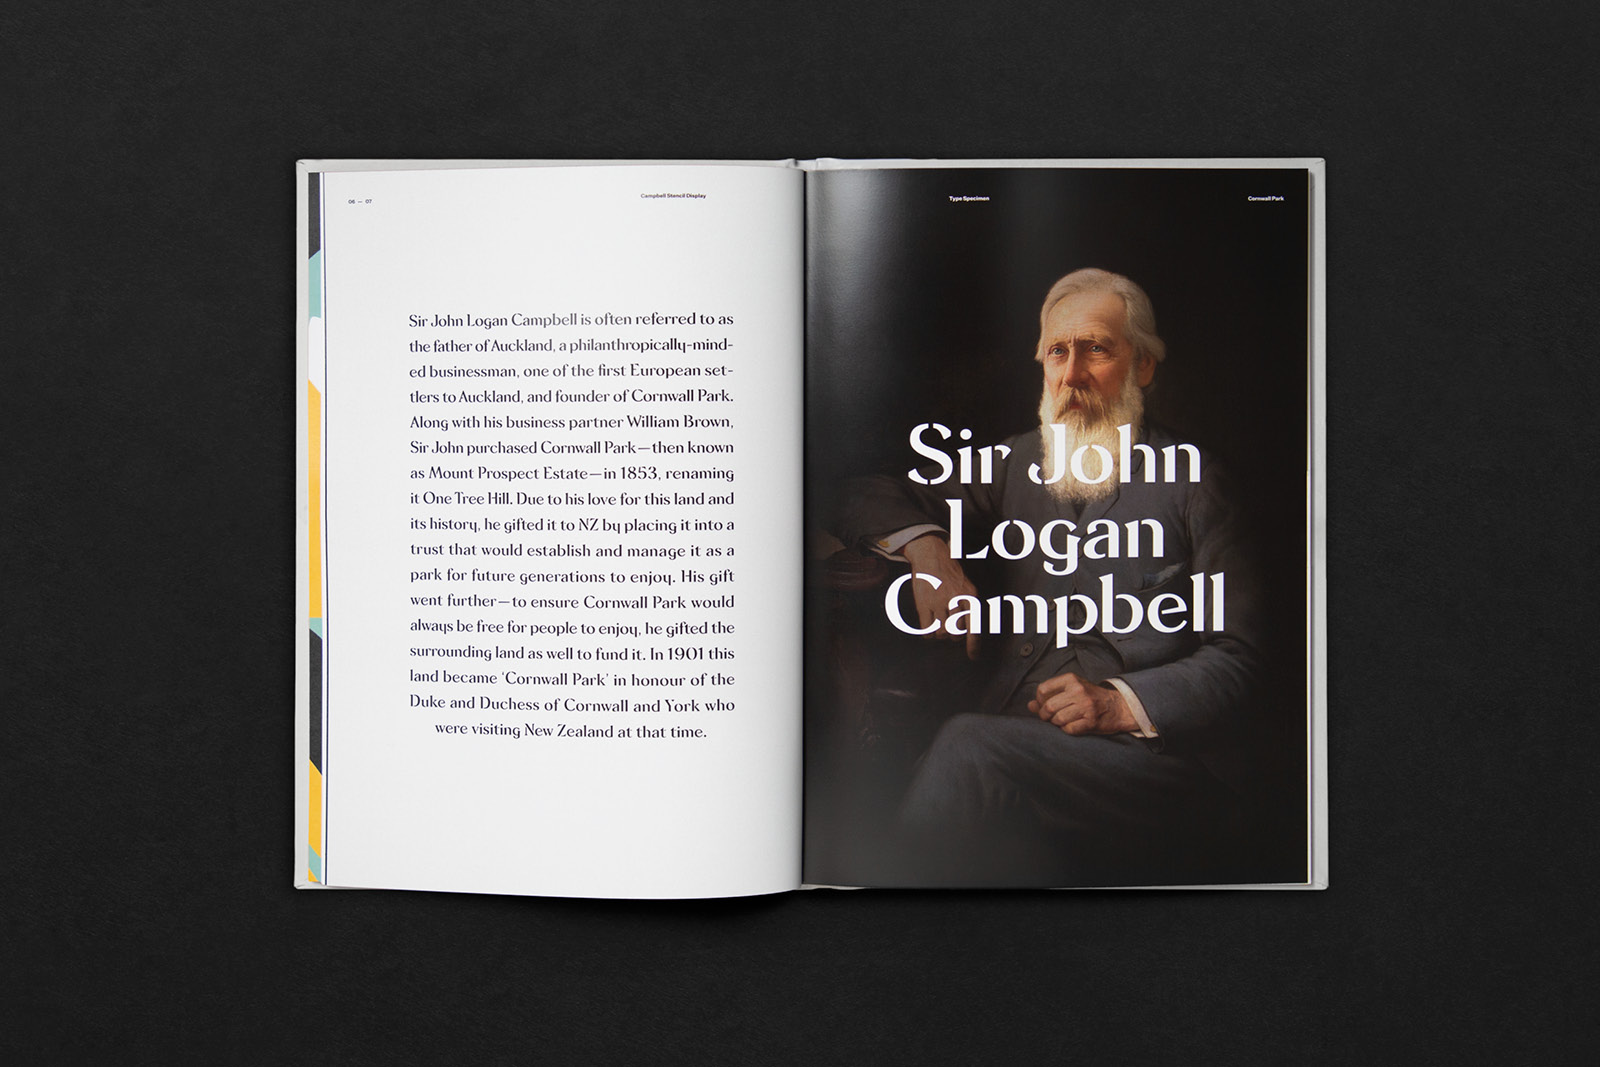 Open pages of book with picture of Sir John Logan Campbell